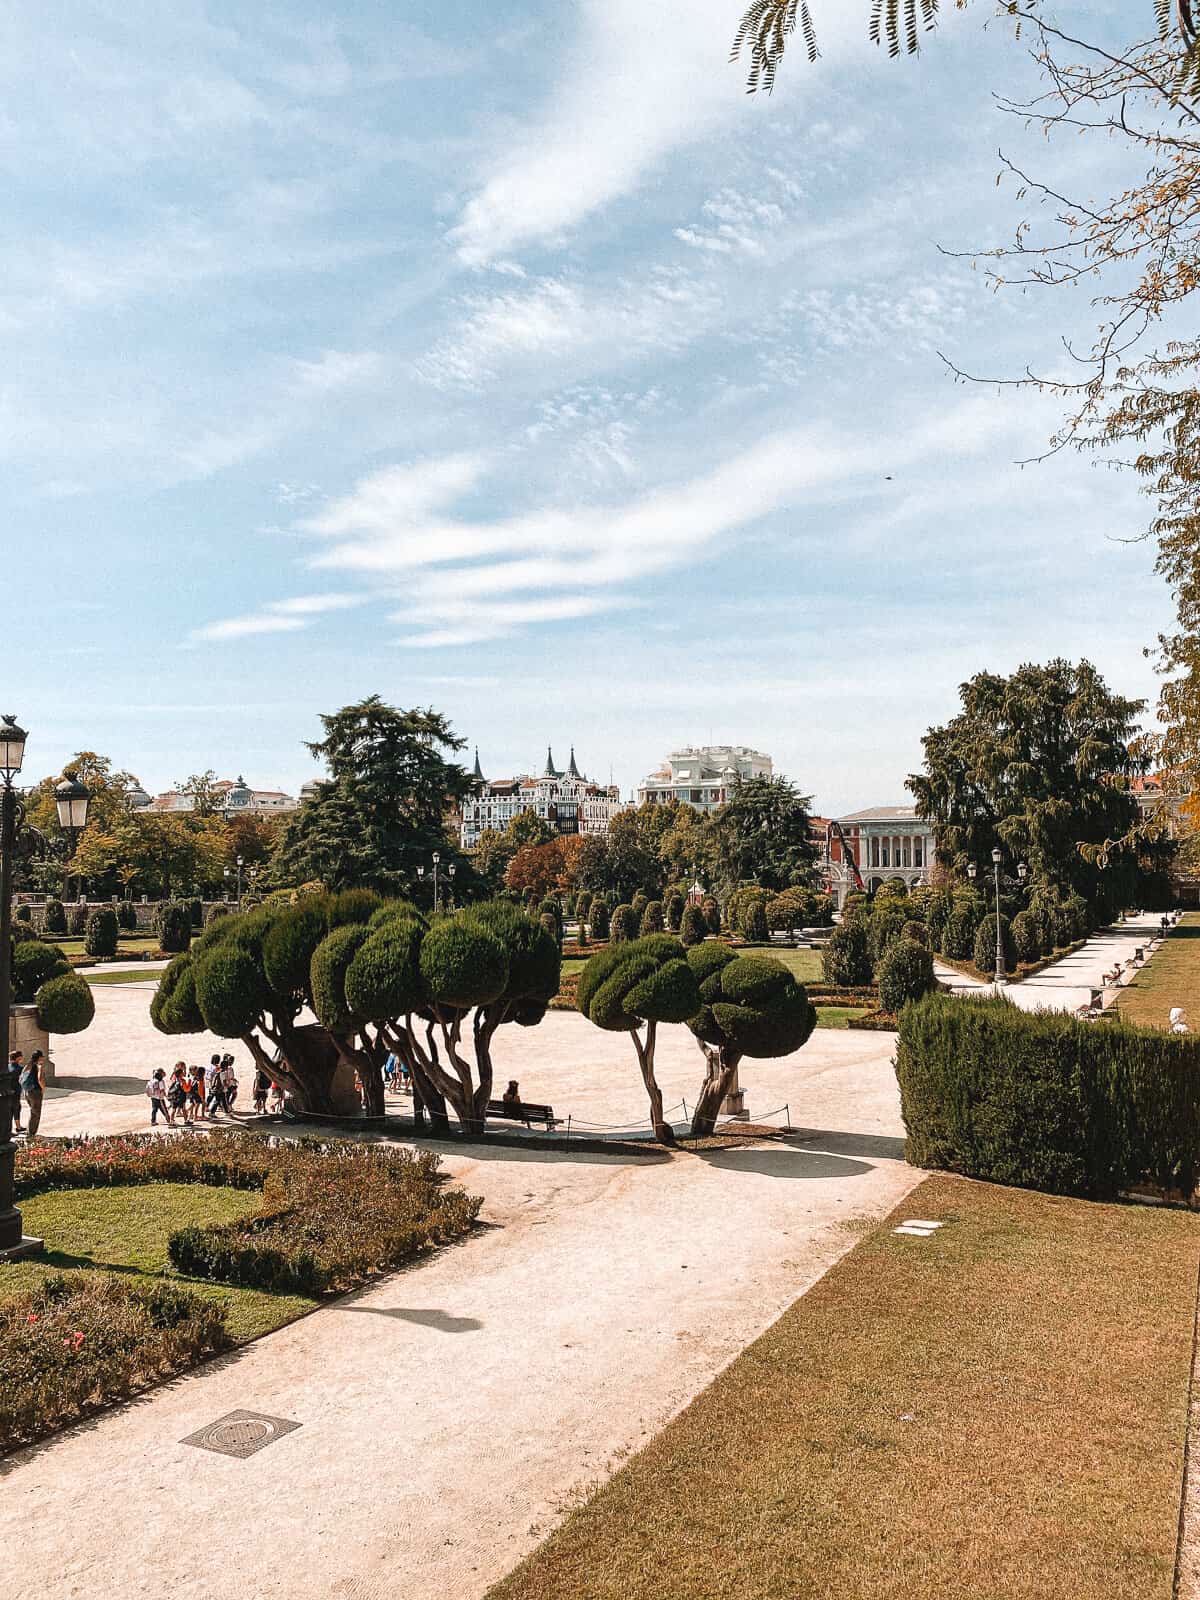 Scenic view of Retiro Park in Madrid, Spain, featuring meticulously shaped topiary trees and visitors enjoying the sunny ambiance, with Madrid’s distinctive architecture in the backdrop